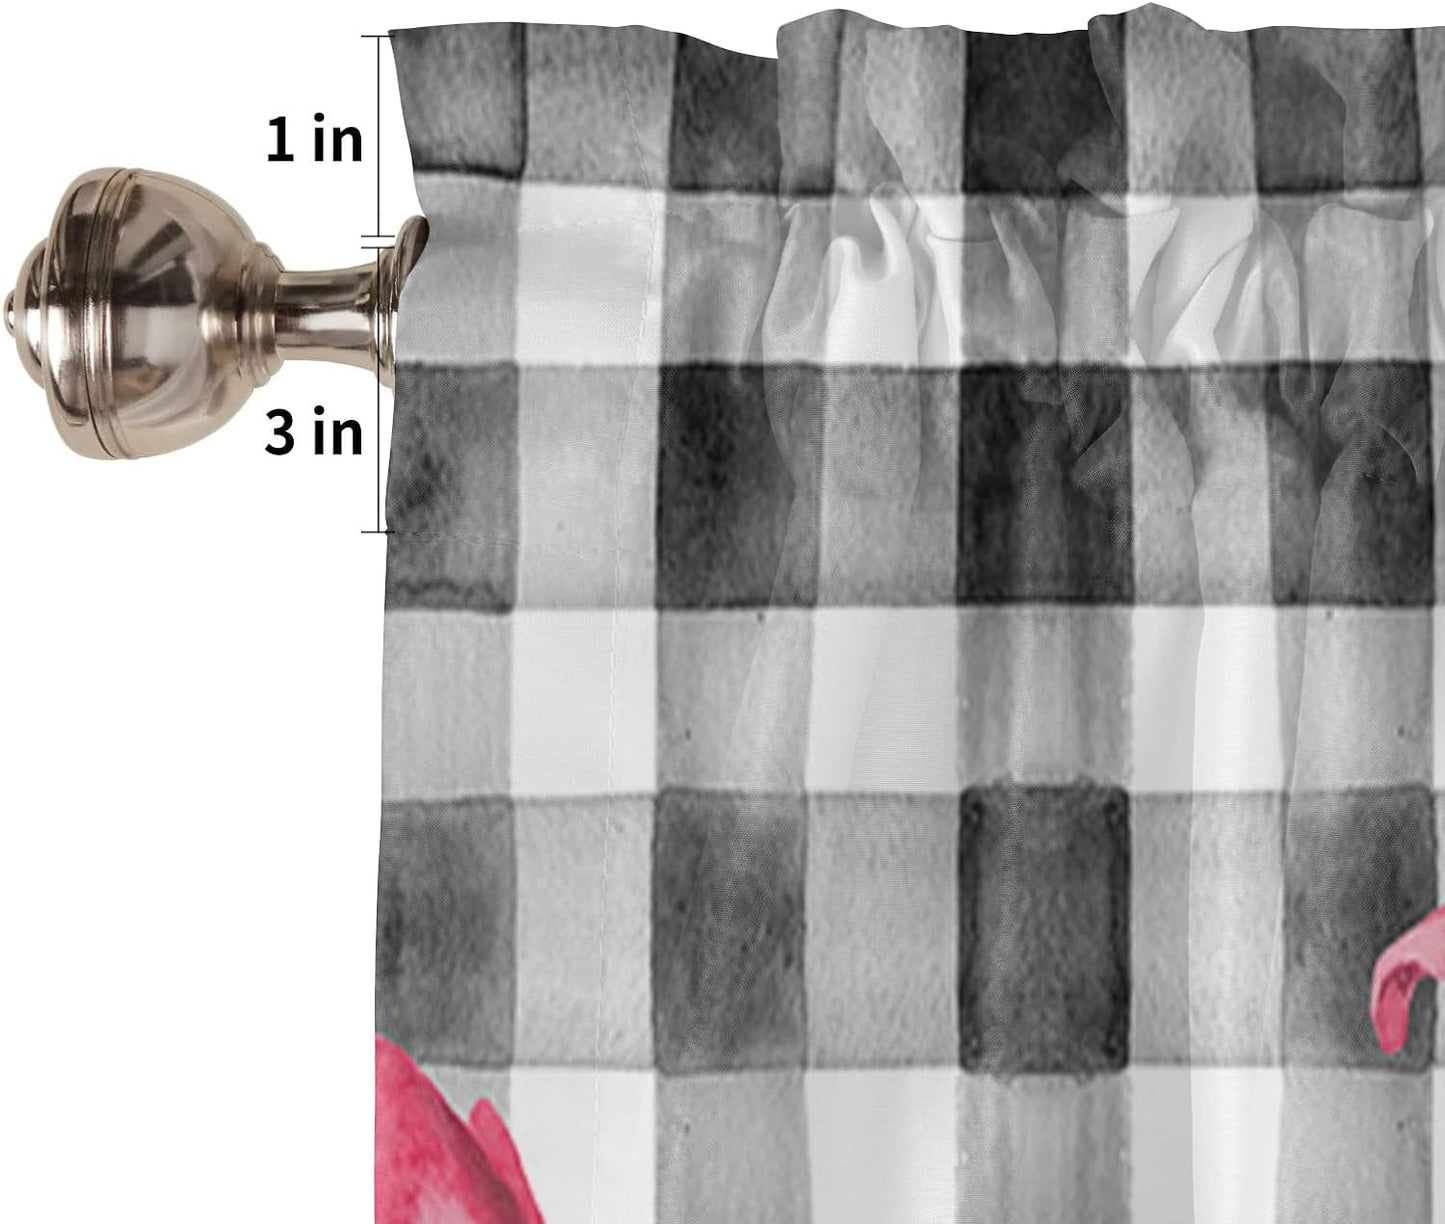 Curtain Valance for Window Watercolor Pink Tulip Black White Buffalo Plaid Rod Pocket Valance Drapes Window Treatment for Kitchen Living Room Bedroom Holiday Decoration 54X18Inch